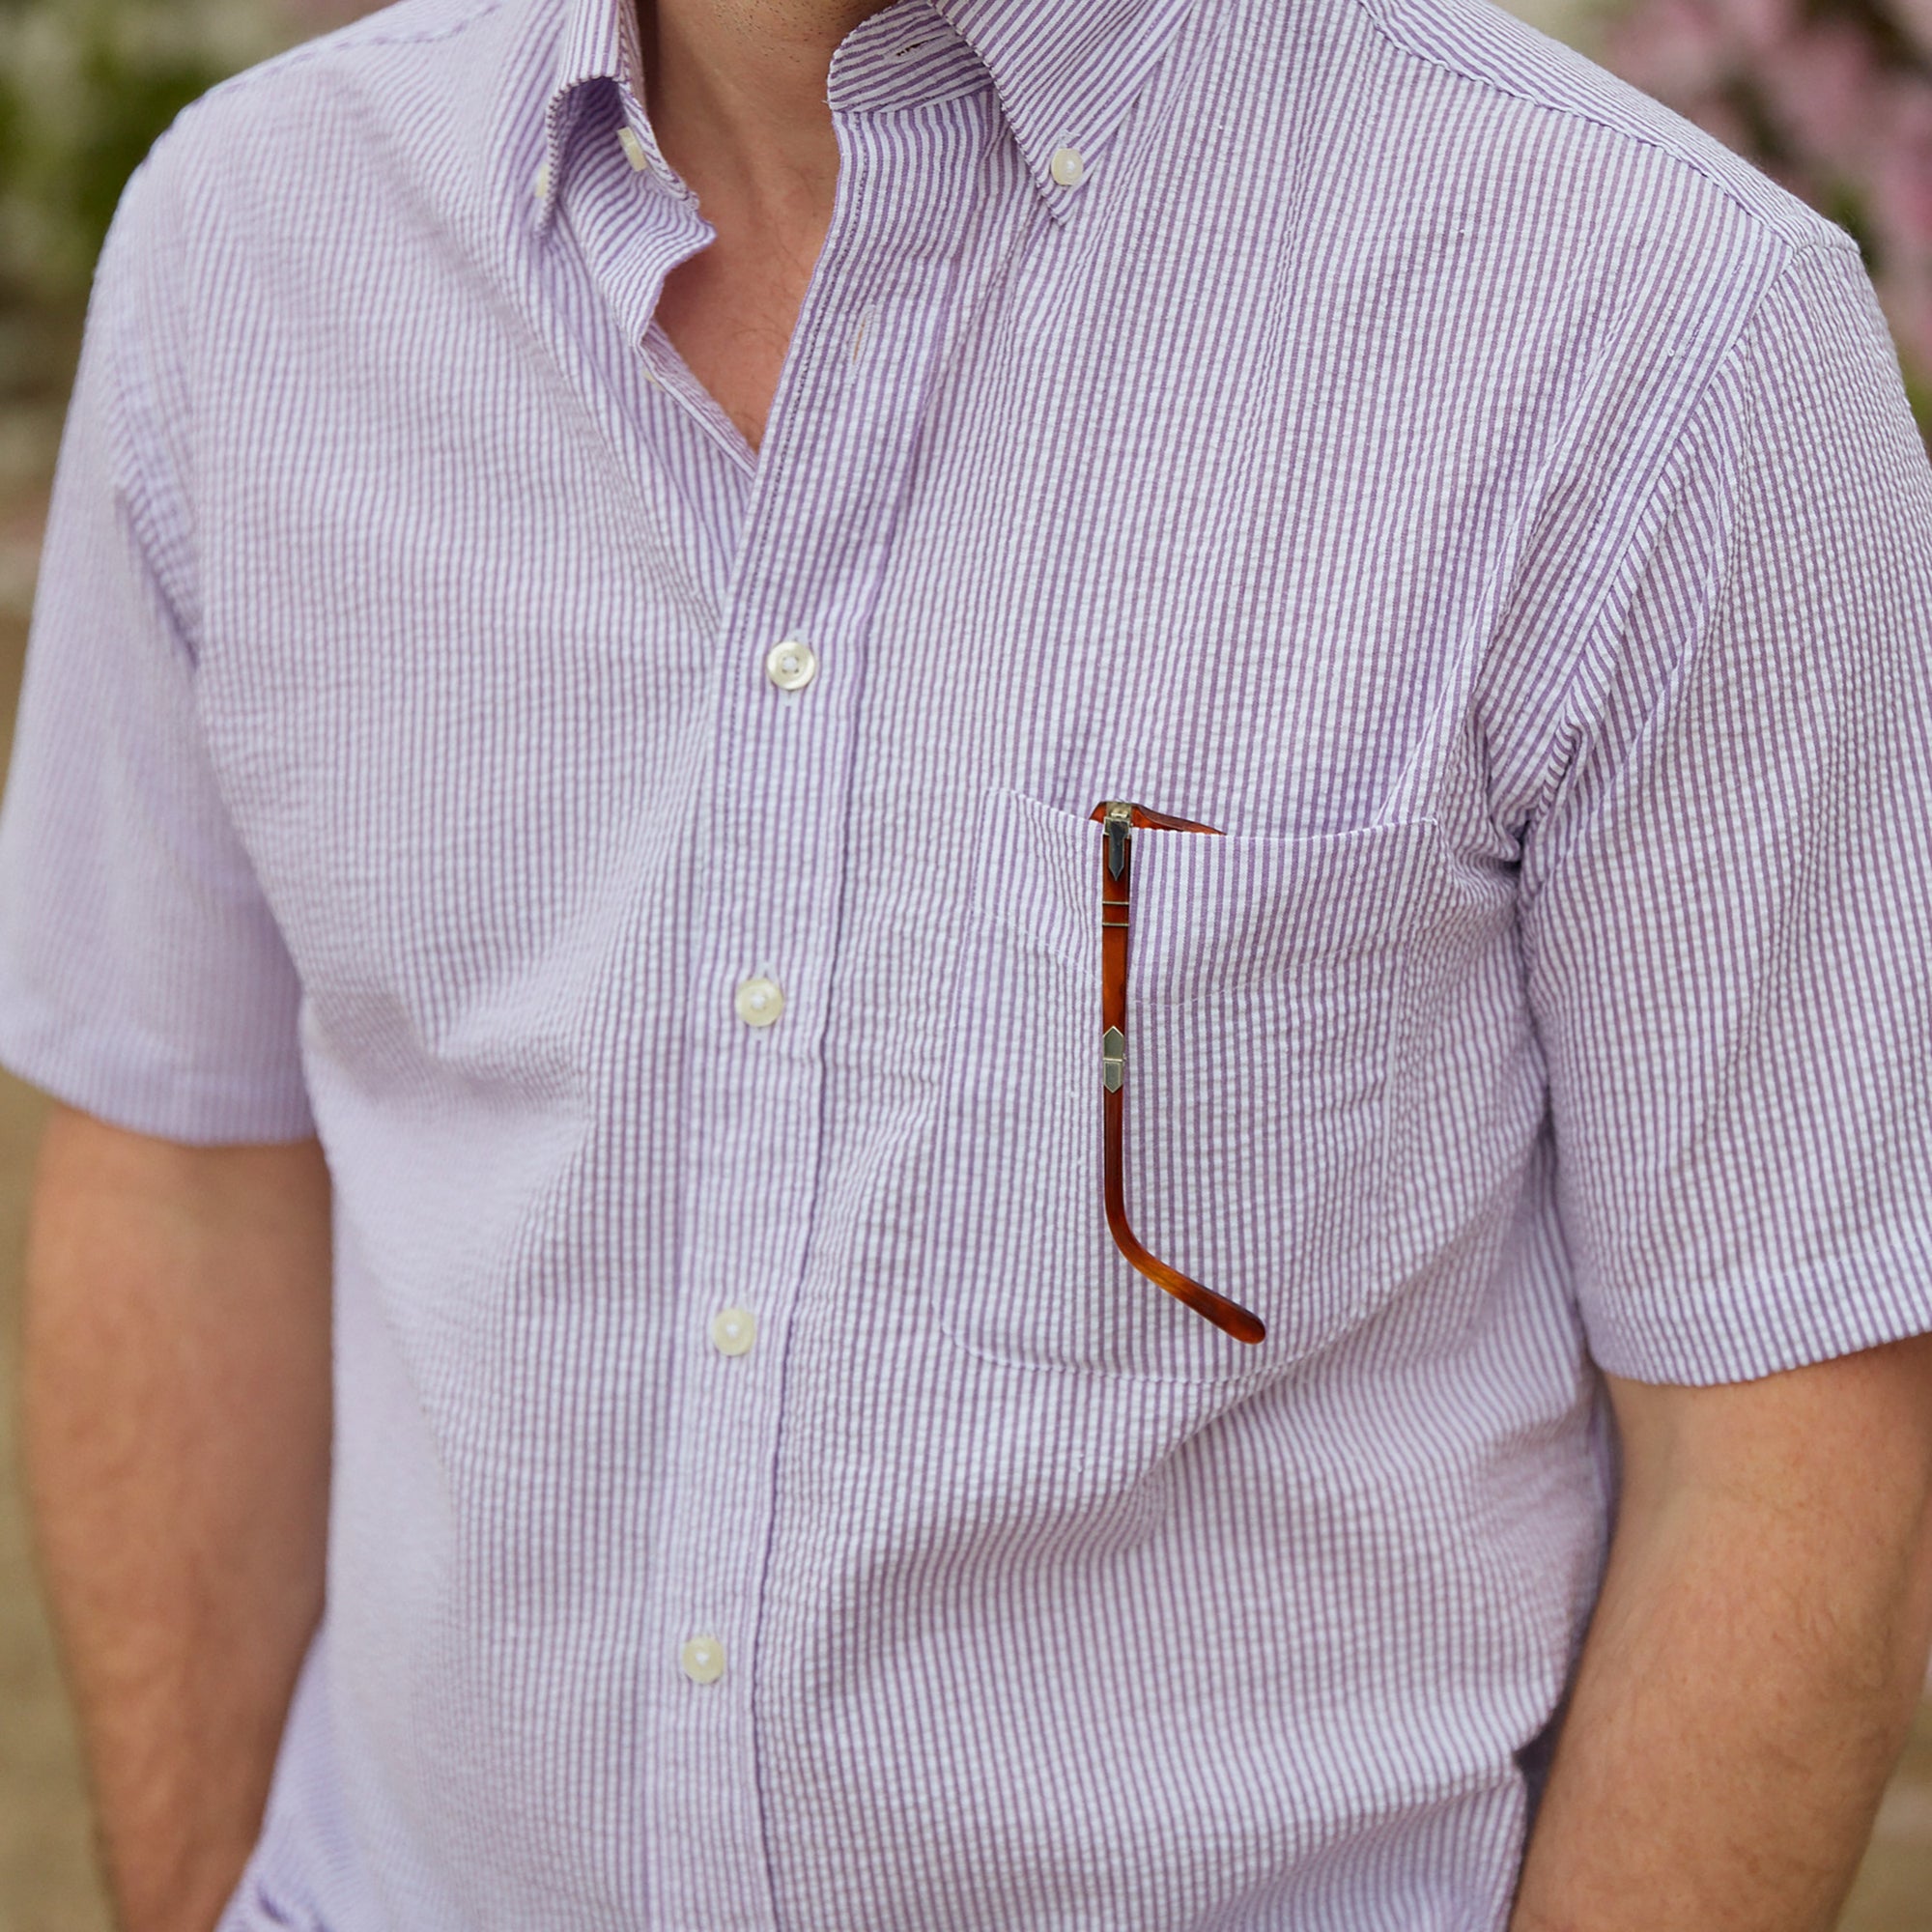 Seersucker all year long in a lavender purple seersucker shirt. Subtle, lightweight, and a texture they begs a second look.  100% Cotton Seersucker • Spread Collar • Short Sleeve • Chest Pocket • Machine Washable • Made in Italy 